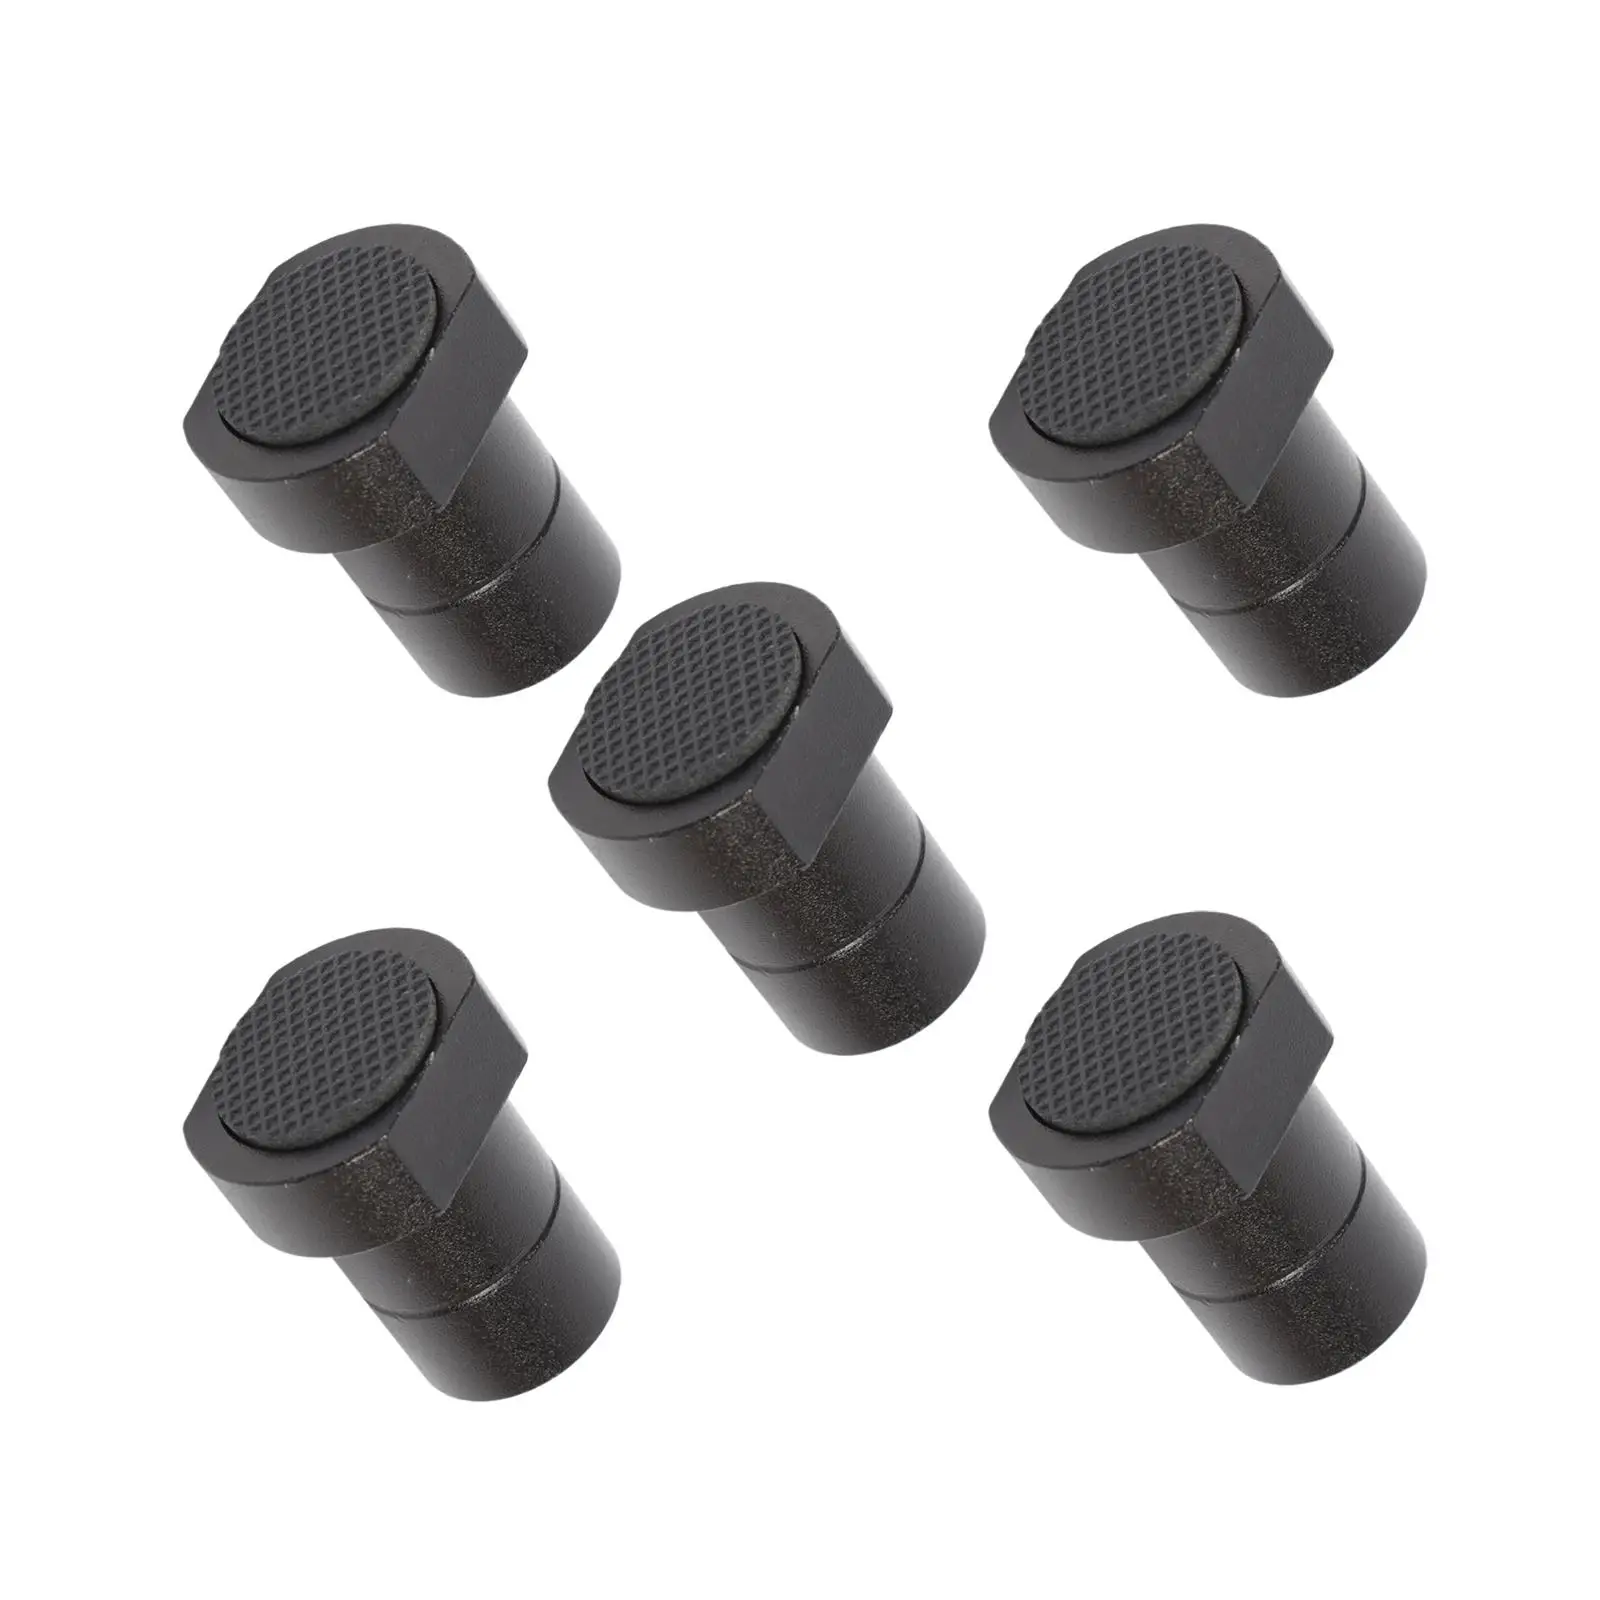 5 Pieces Woodworking Bench Dogs Sturdy Aluminum Alloy Workbench Peg Stoppers